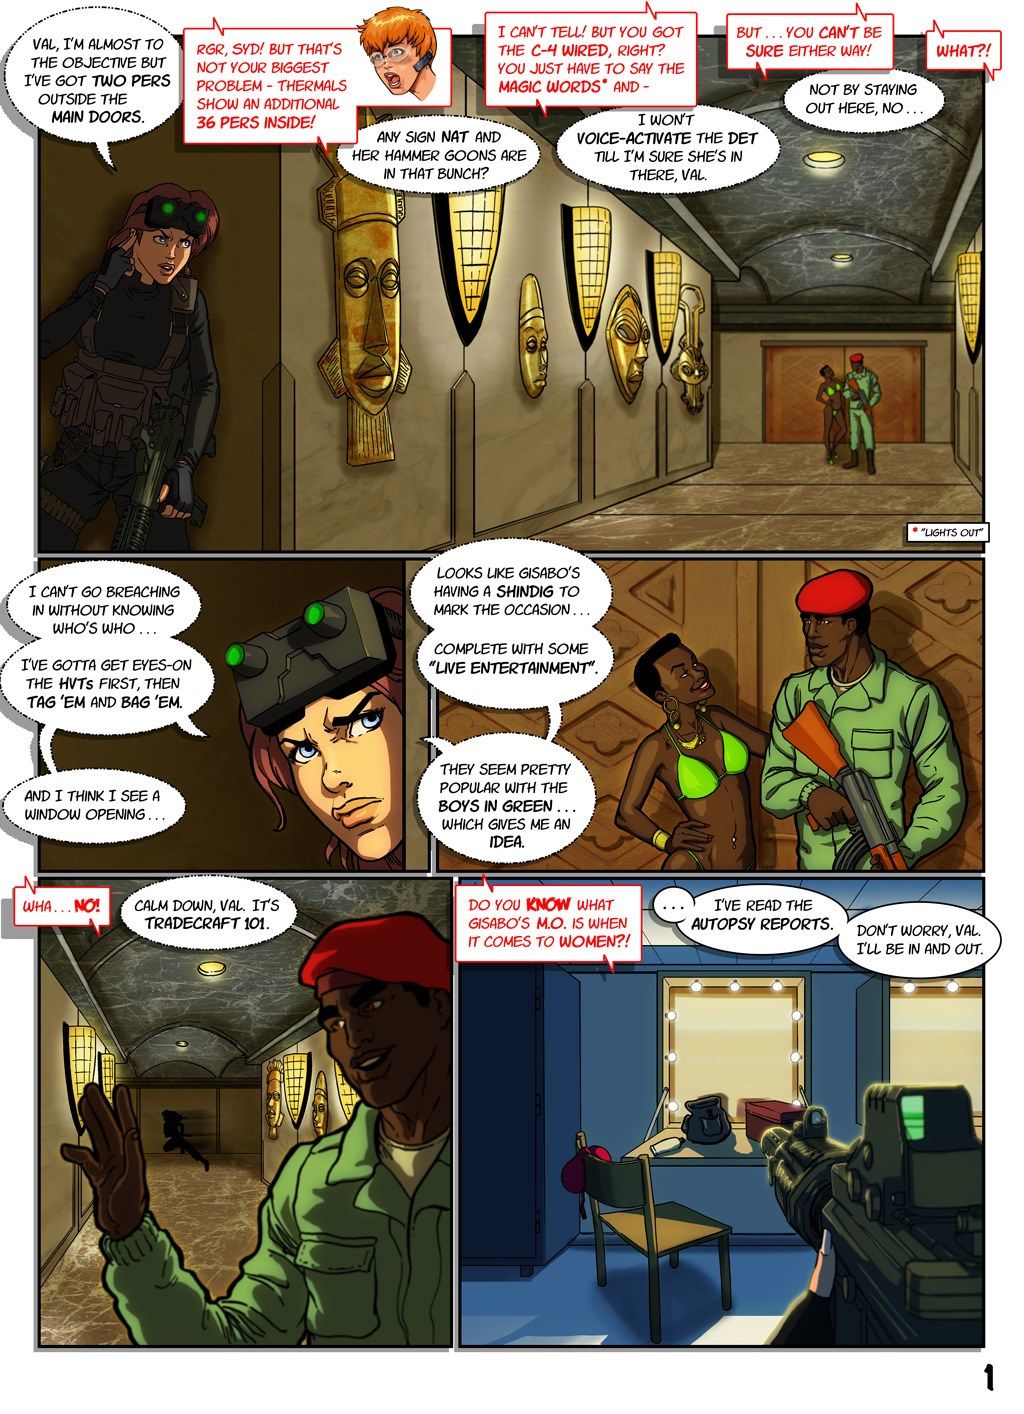 Sydney and Gisabo - Studio-Pirrate page 2